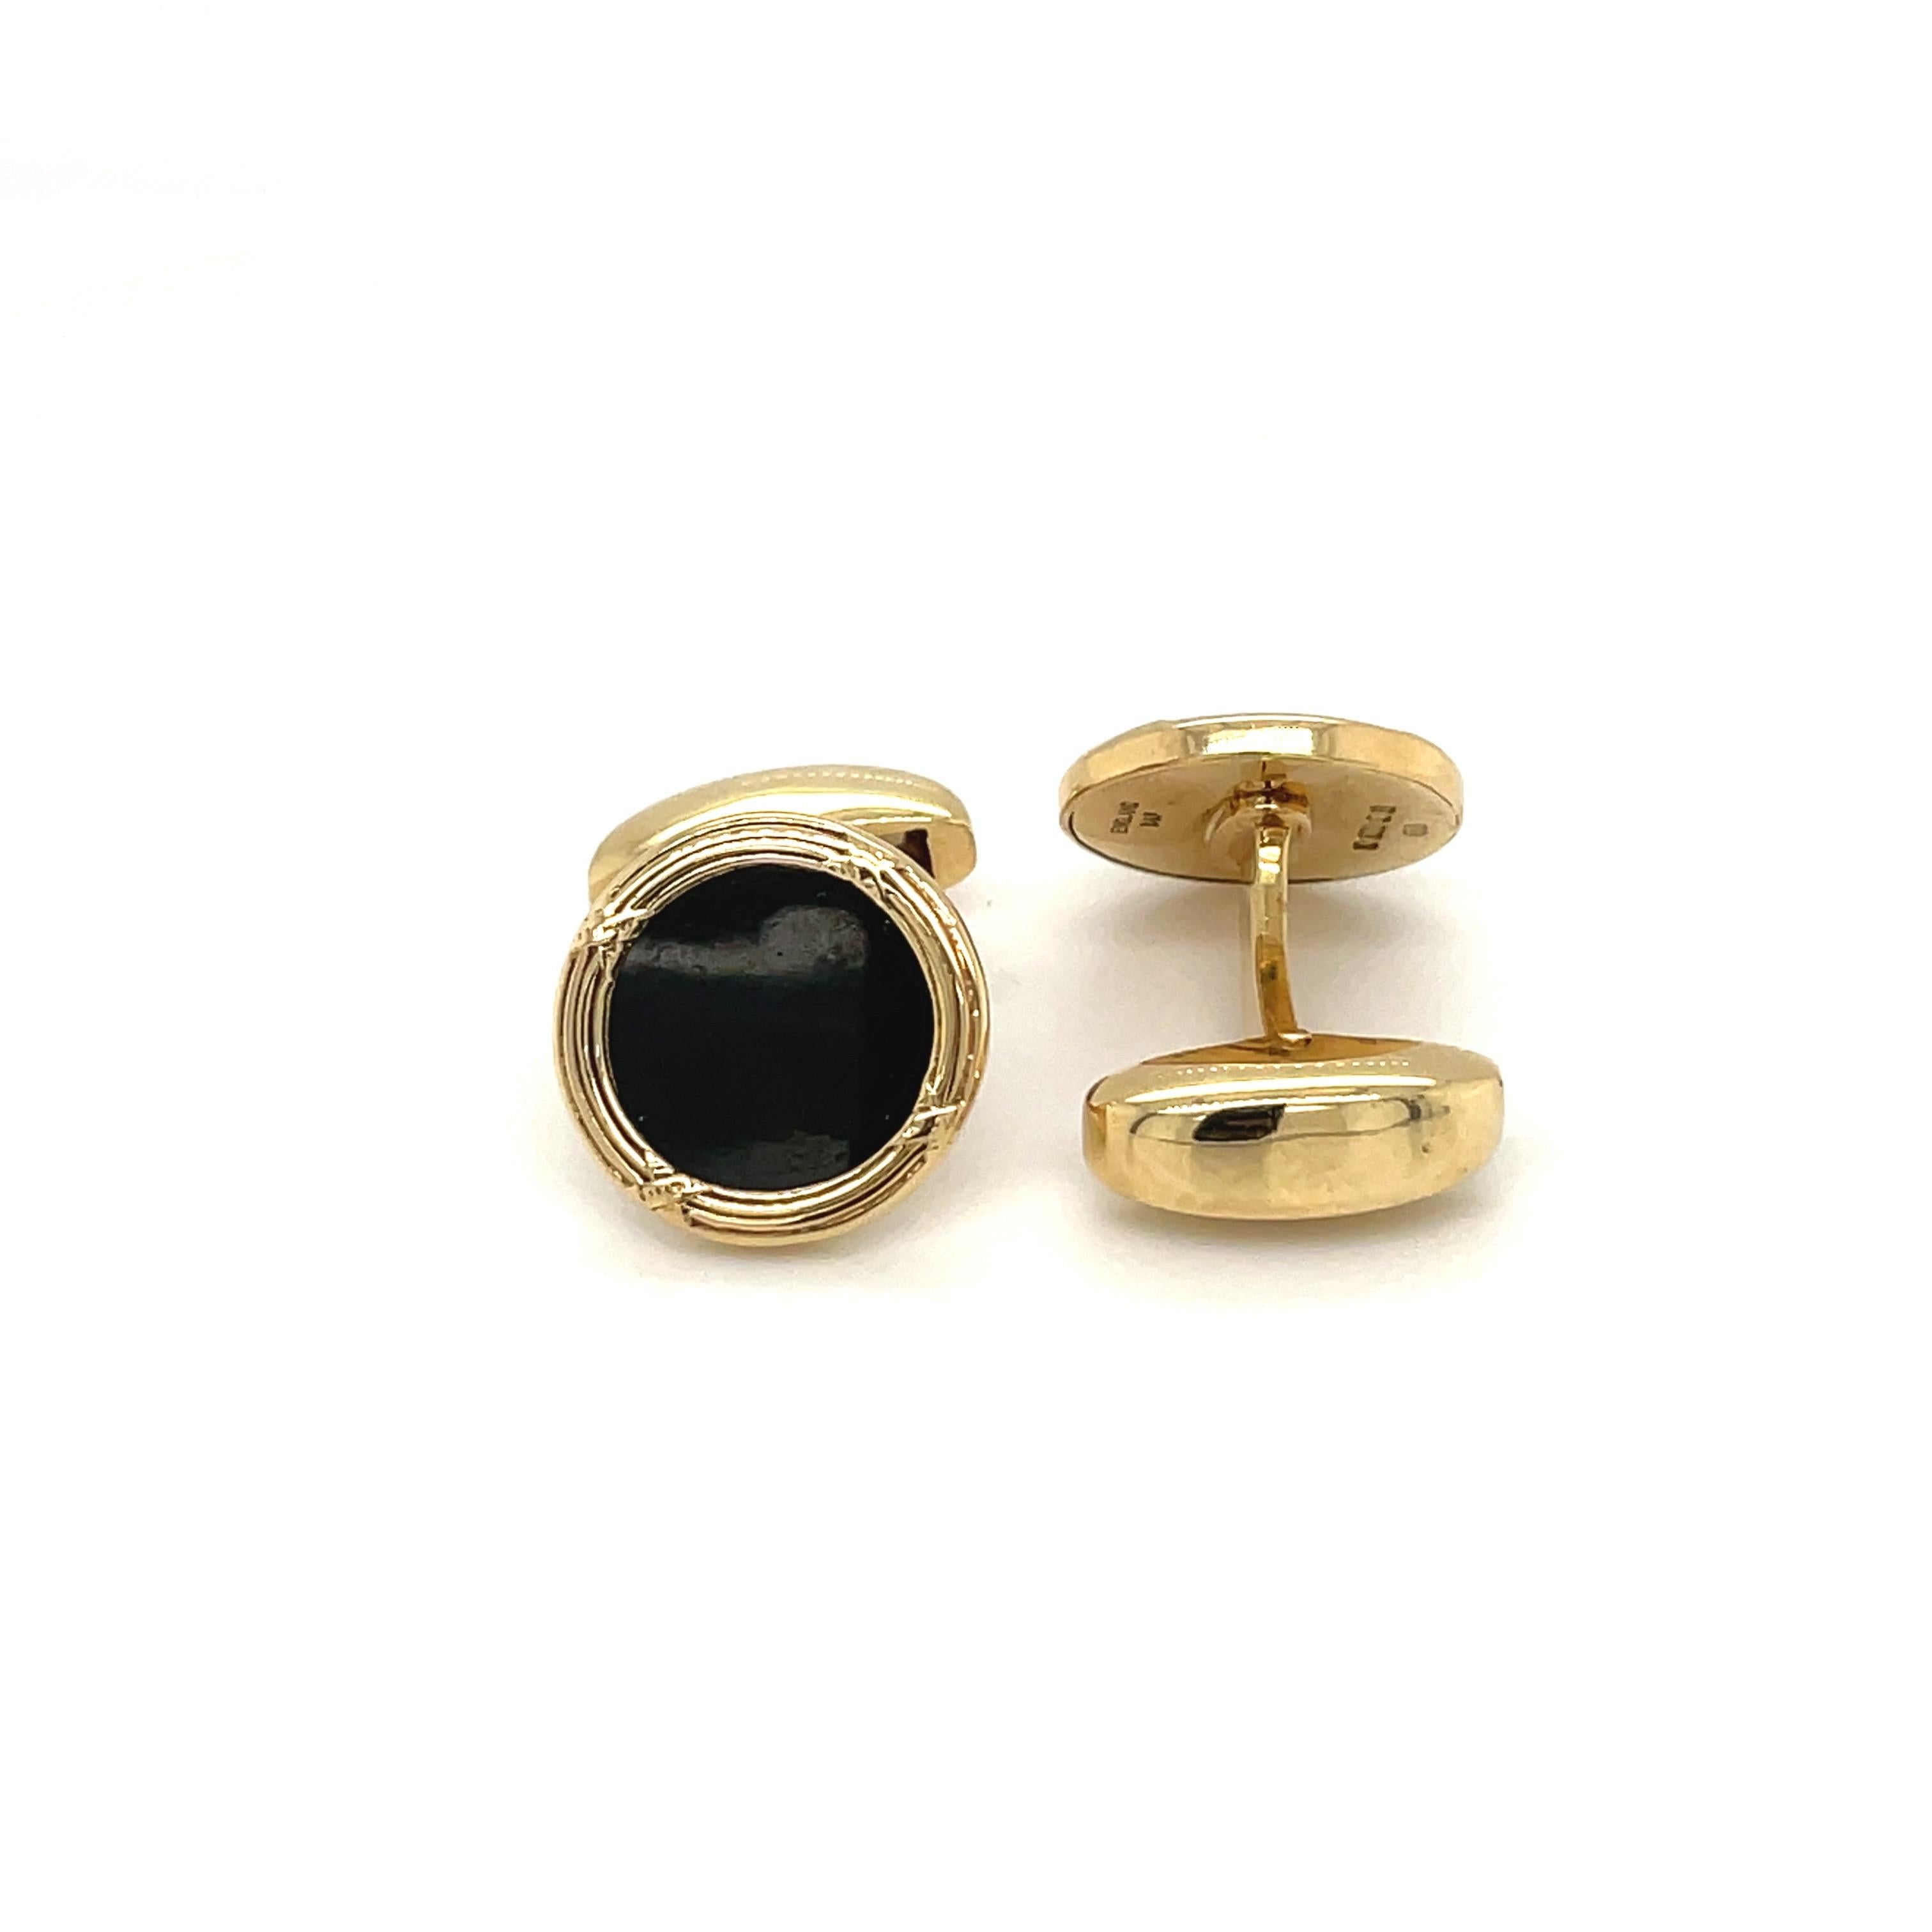 18 karat yellow gold cuff links by Deakin & Francis, England's oldest family jewelers since 1786.
The round cuff links have black onyx centers with a gold detailed bezel. The bar back style cuff links are 14.5 mm in diameter.
Stamped England D&F 750